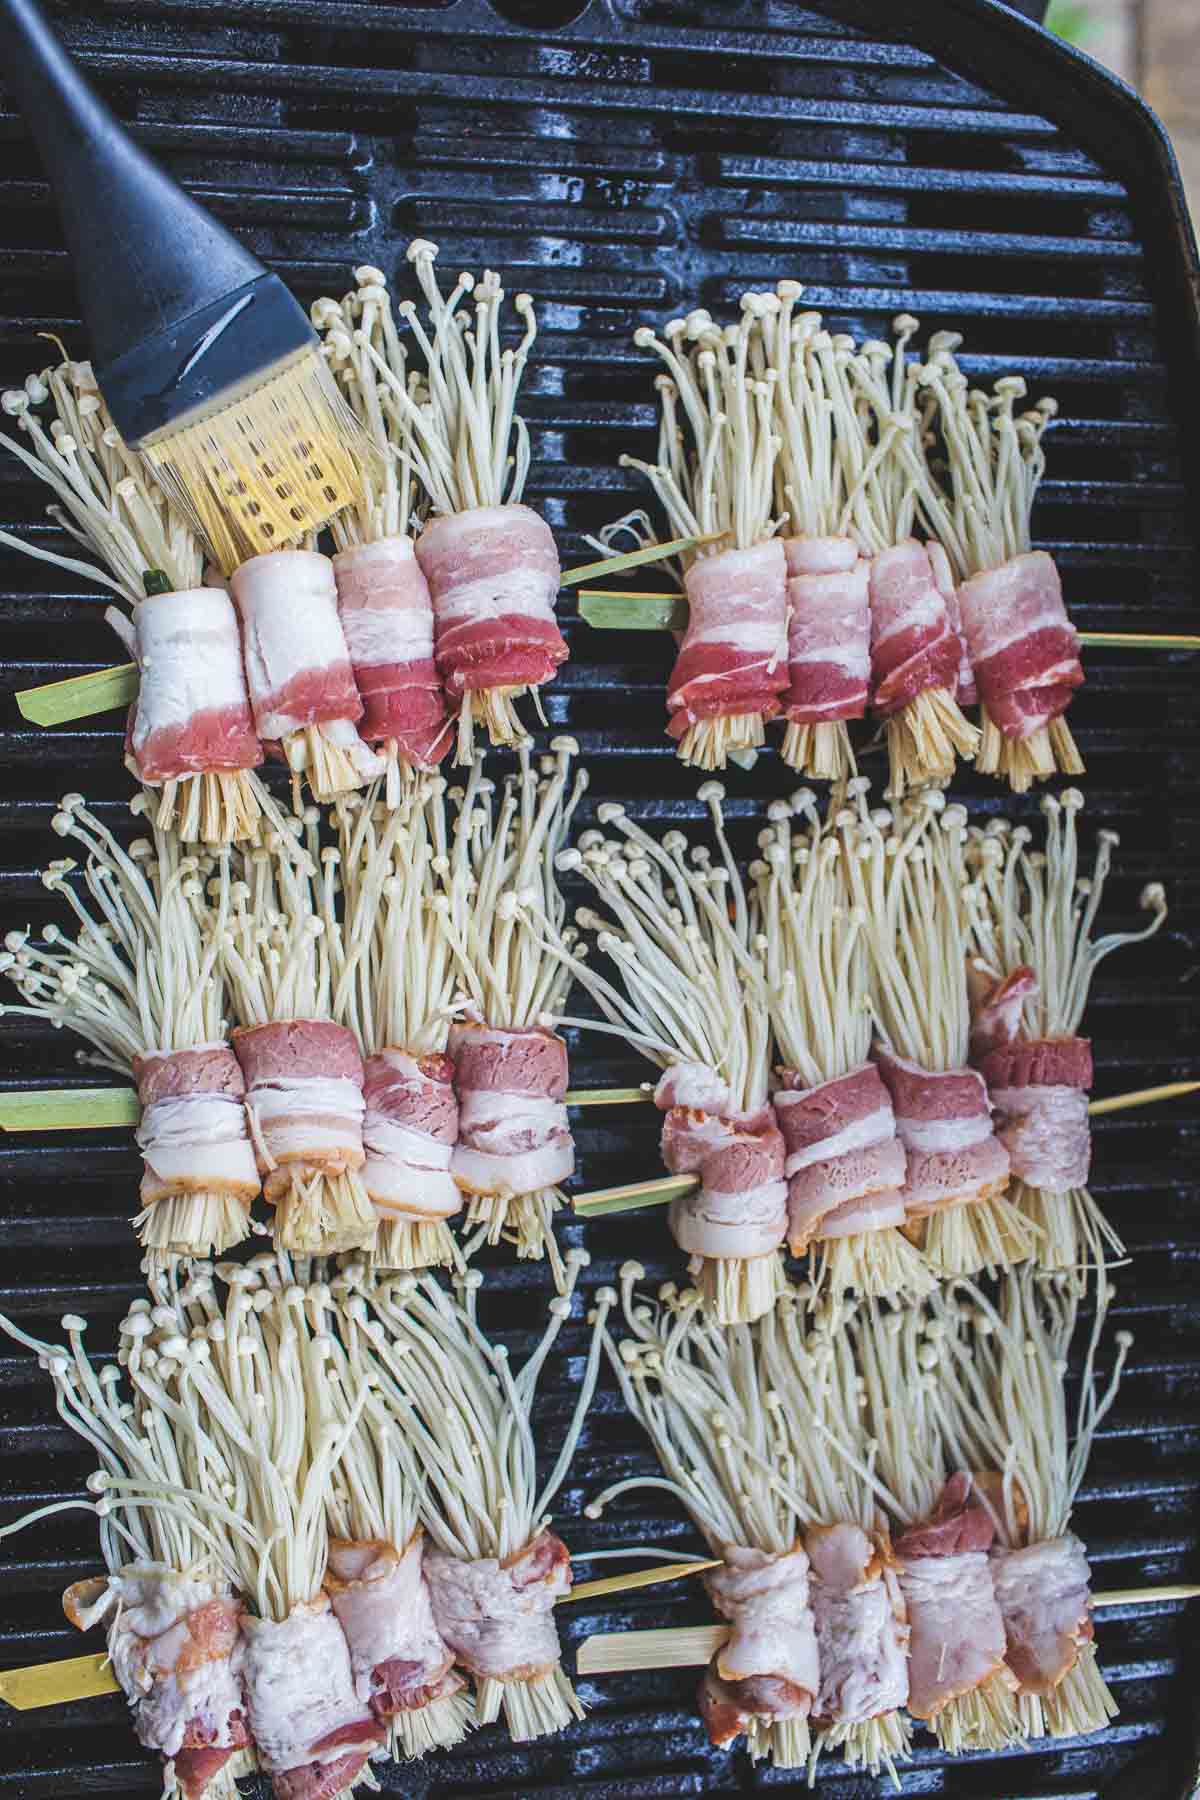 Enoki and bacon skewers on the grill with a brush on the mushrooms. 